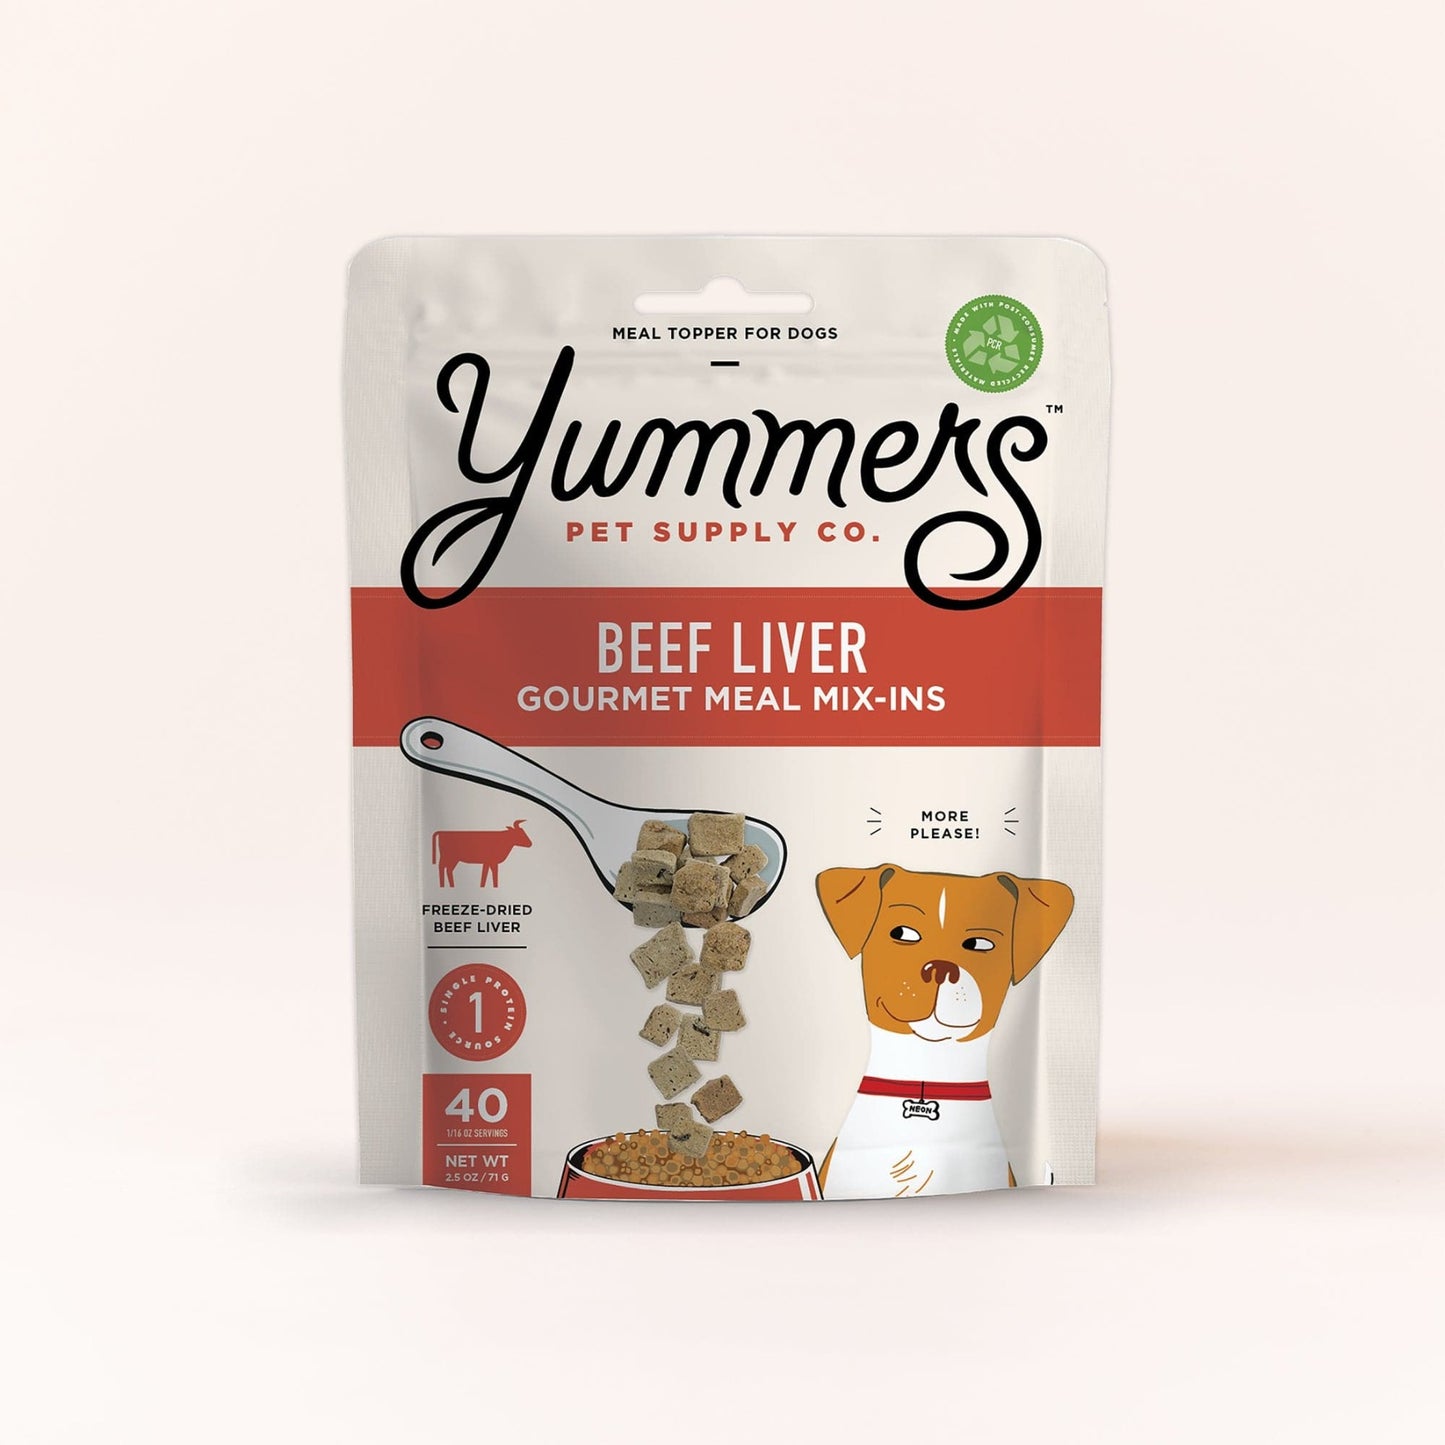 Freeze-dried Beef Liver Gourmet Meal Mix-in for Dogs - front